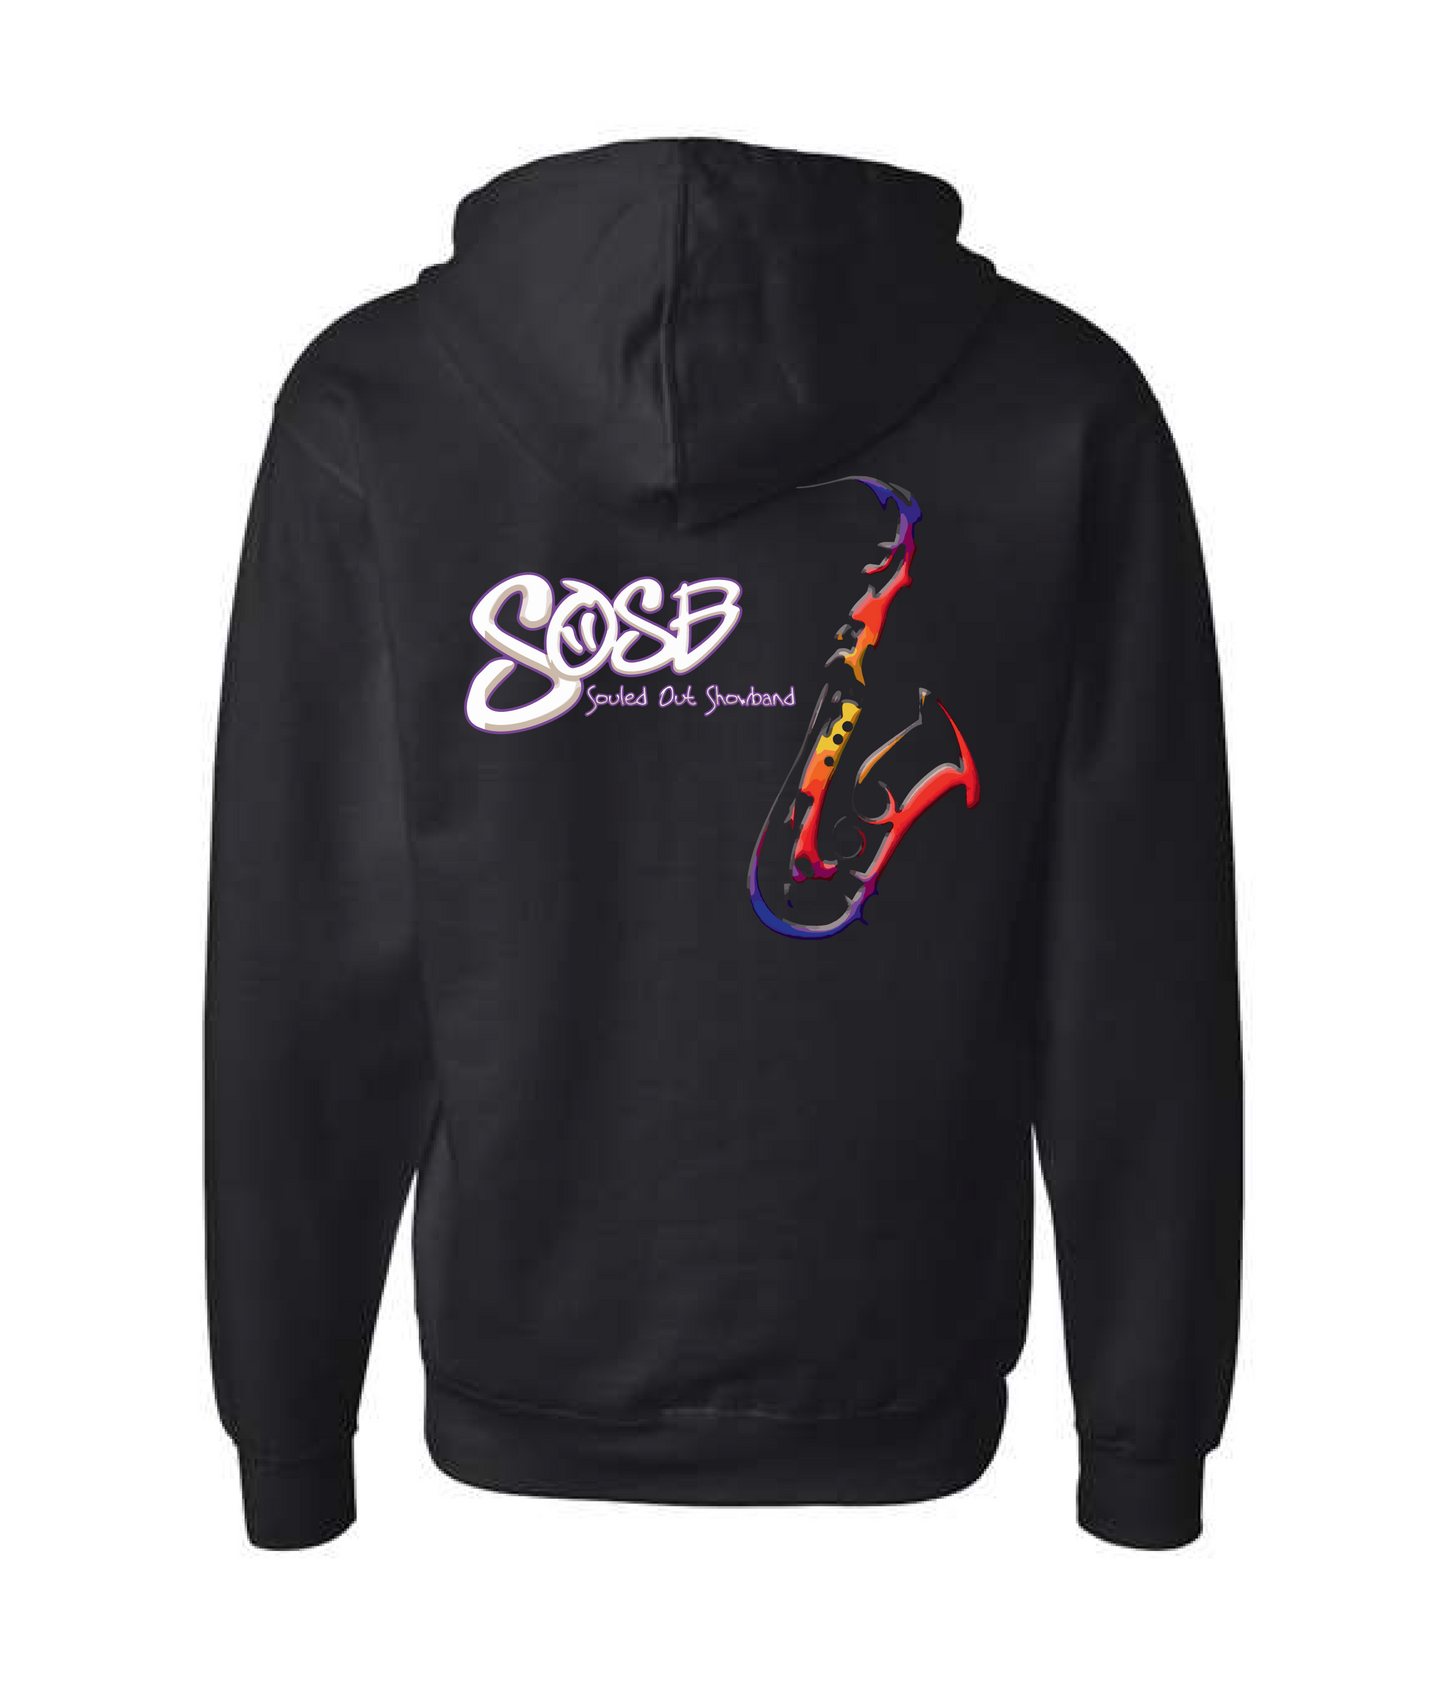 Souled Out Show Band - Logo - Black Zip Hoodie